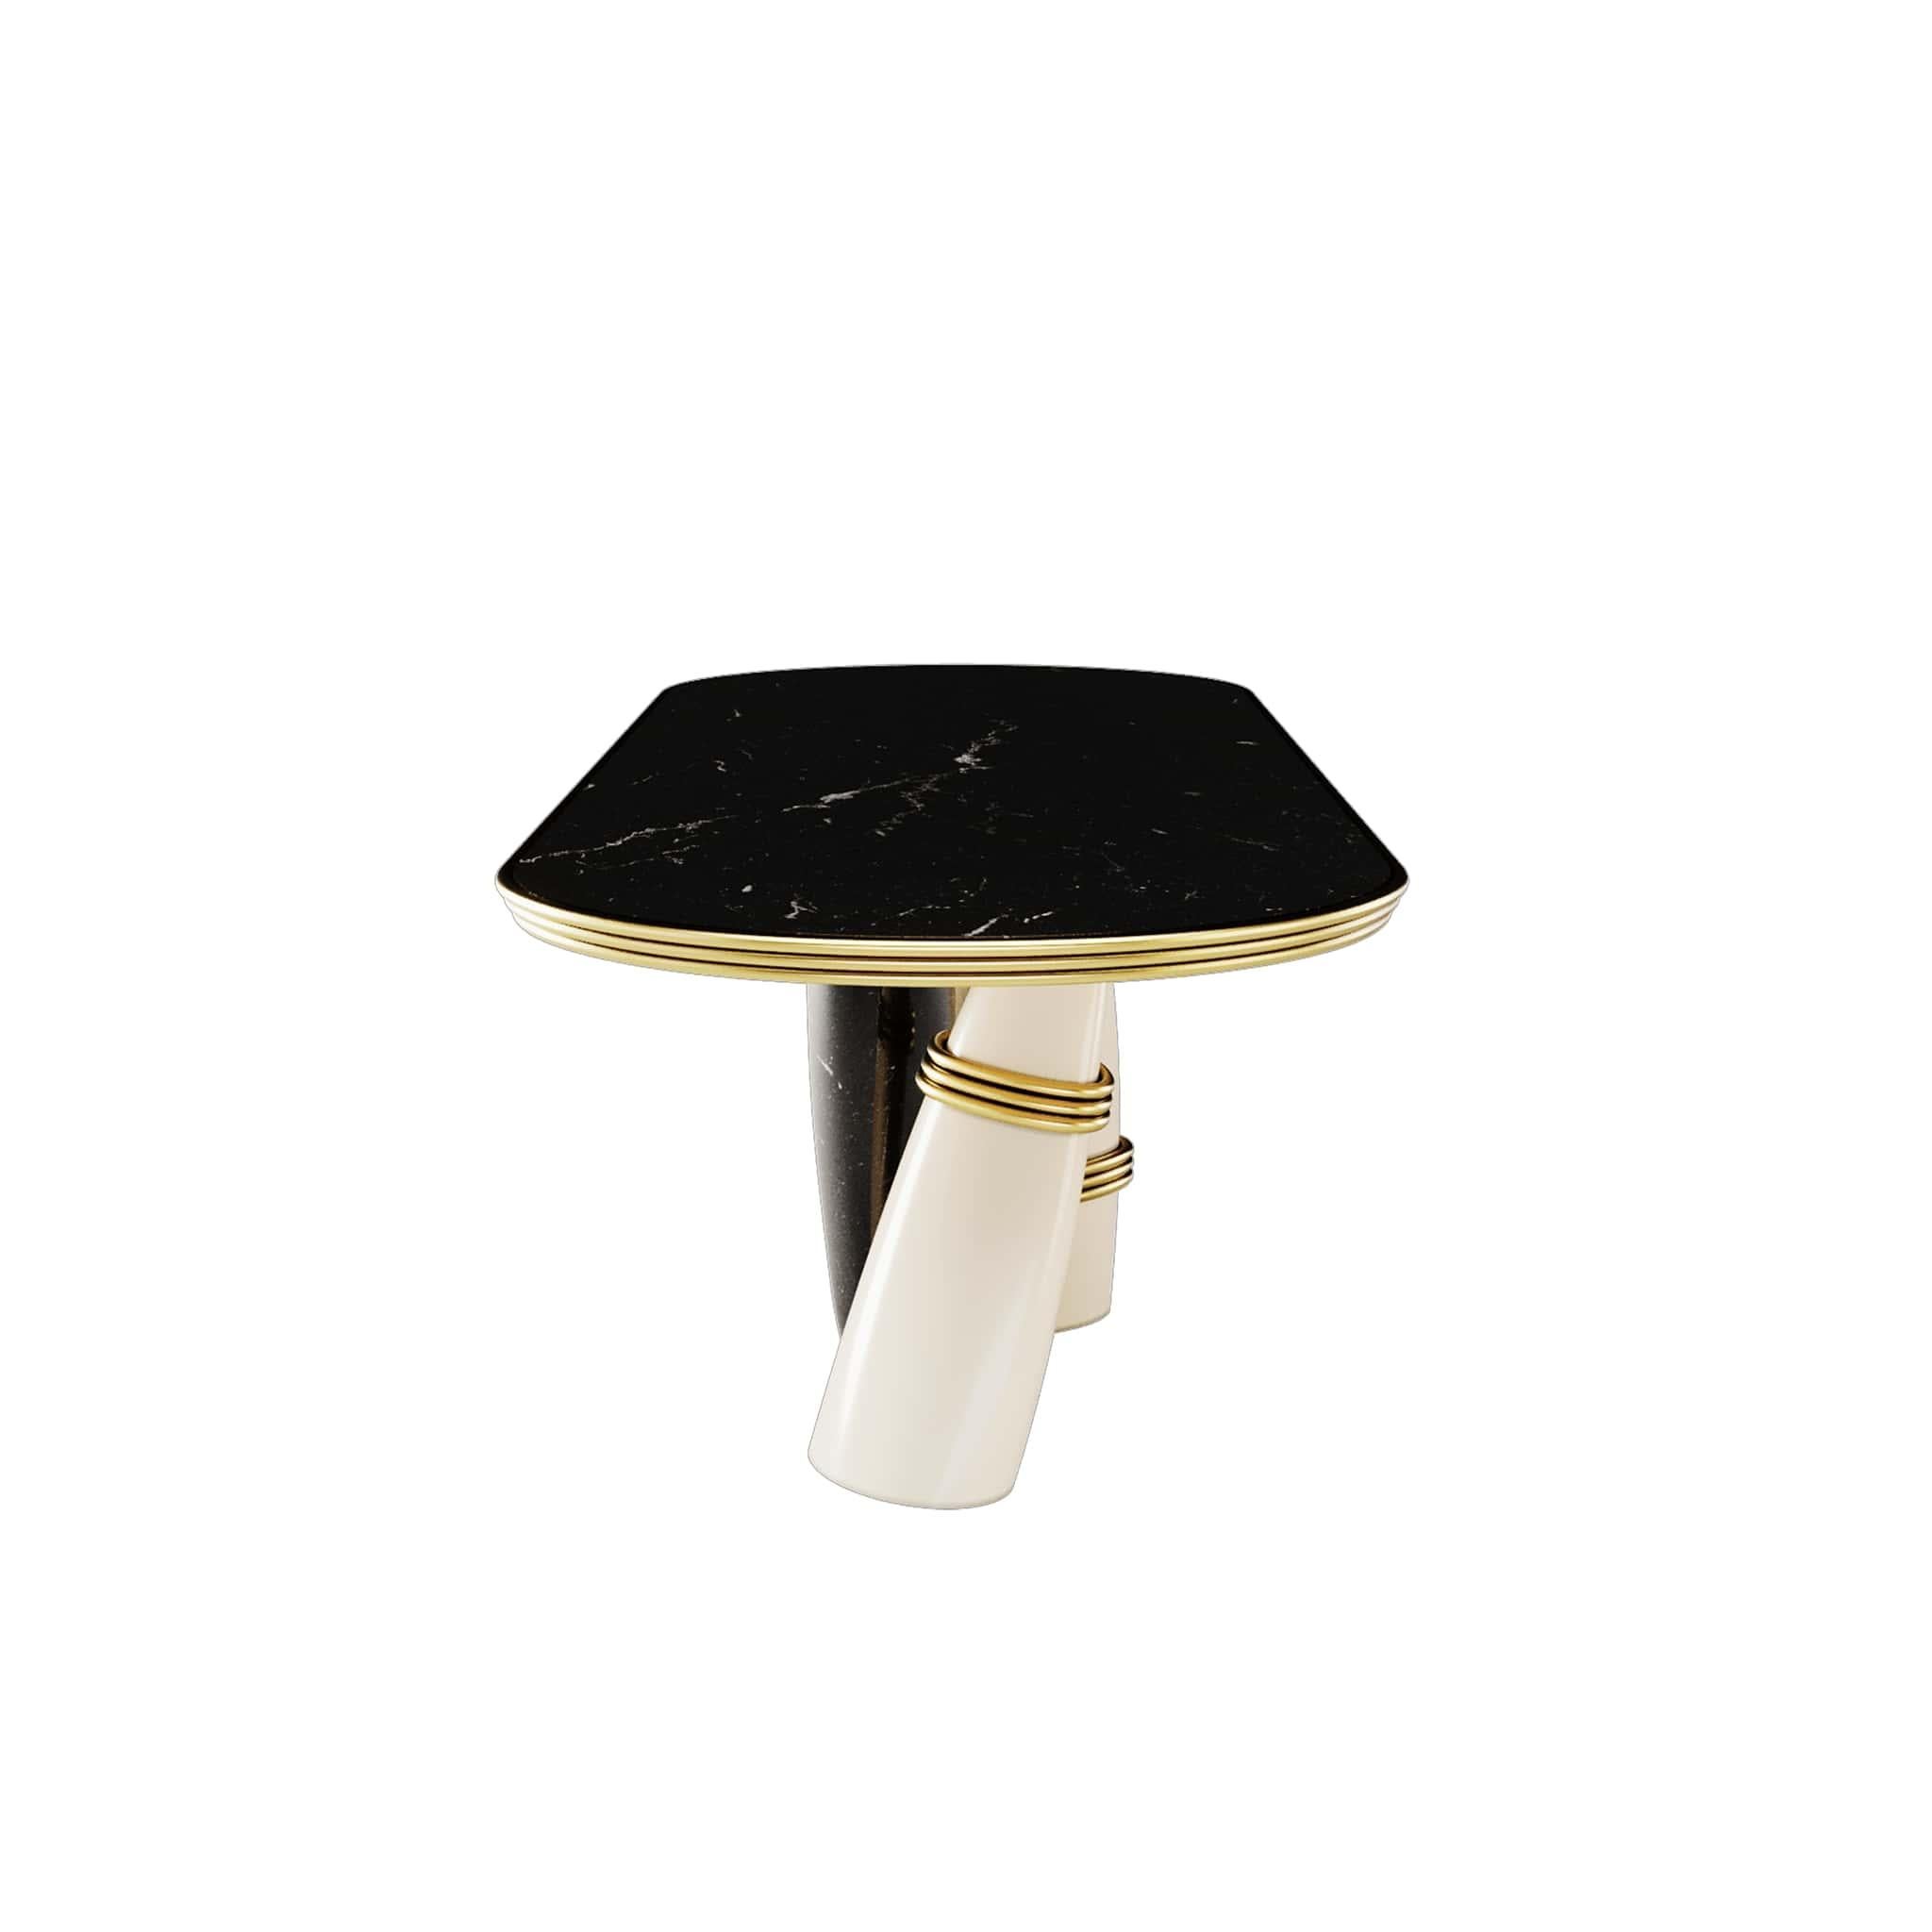 Modern Contemporary Oval Dining Table in Nero Marquina, White Lacquer & Brass Details For Sale